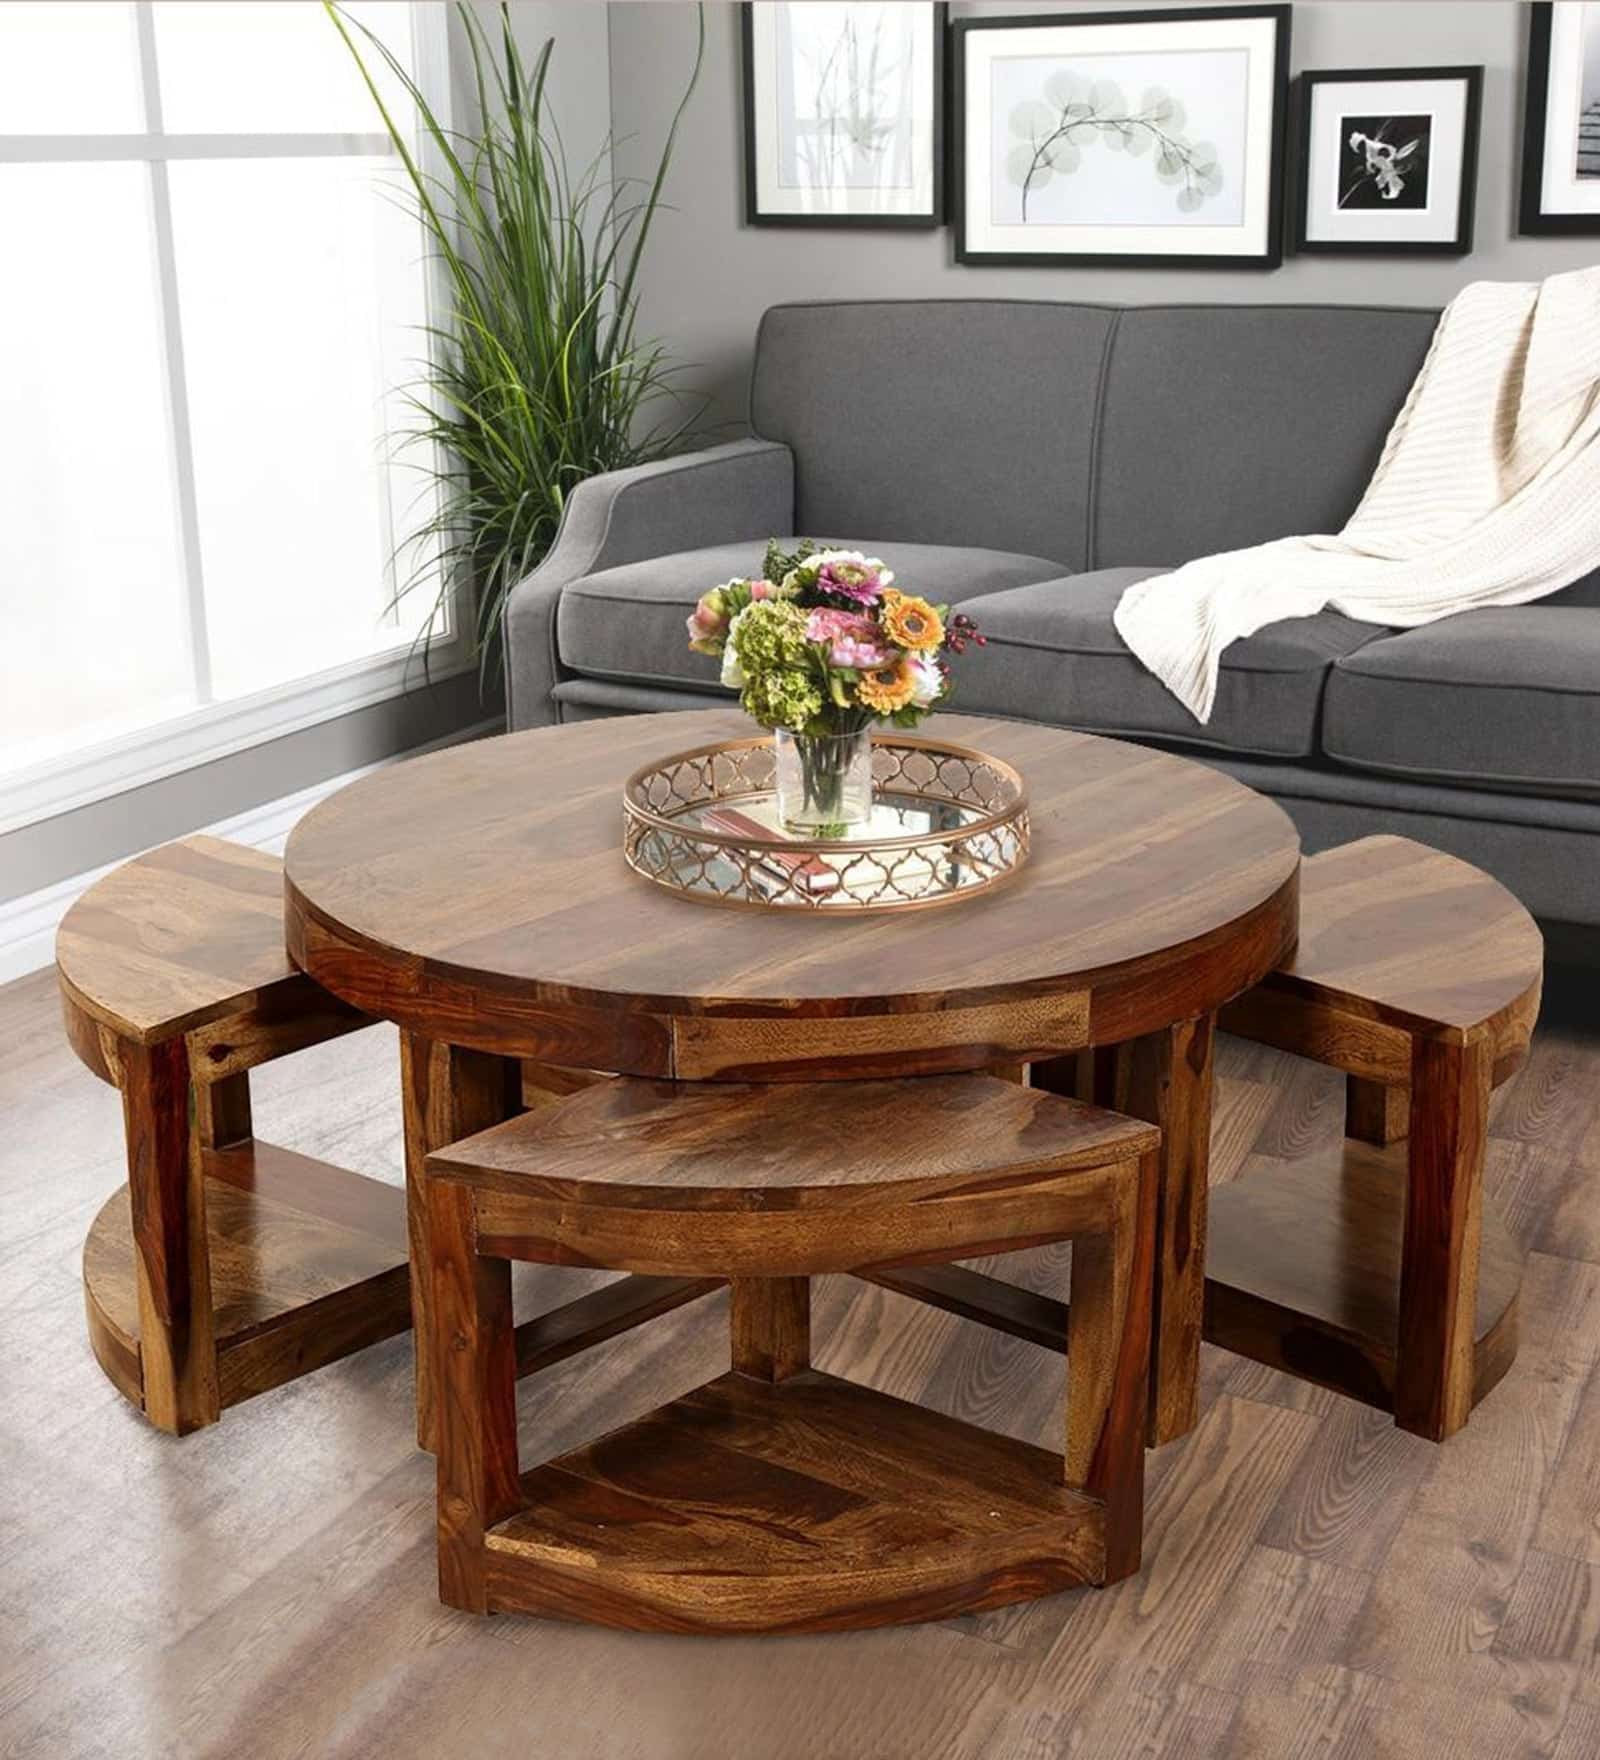 Round Sheesham Solid Wood Coffee Table With 4 Stools Finish By MFT  My ...